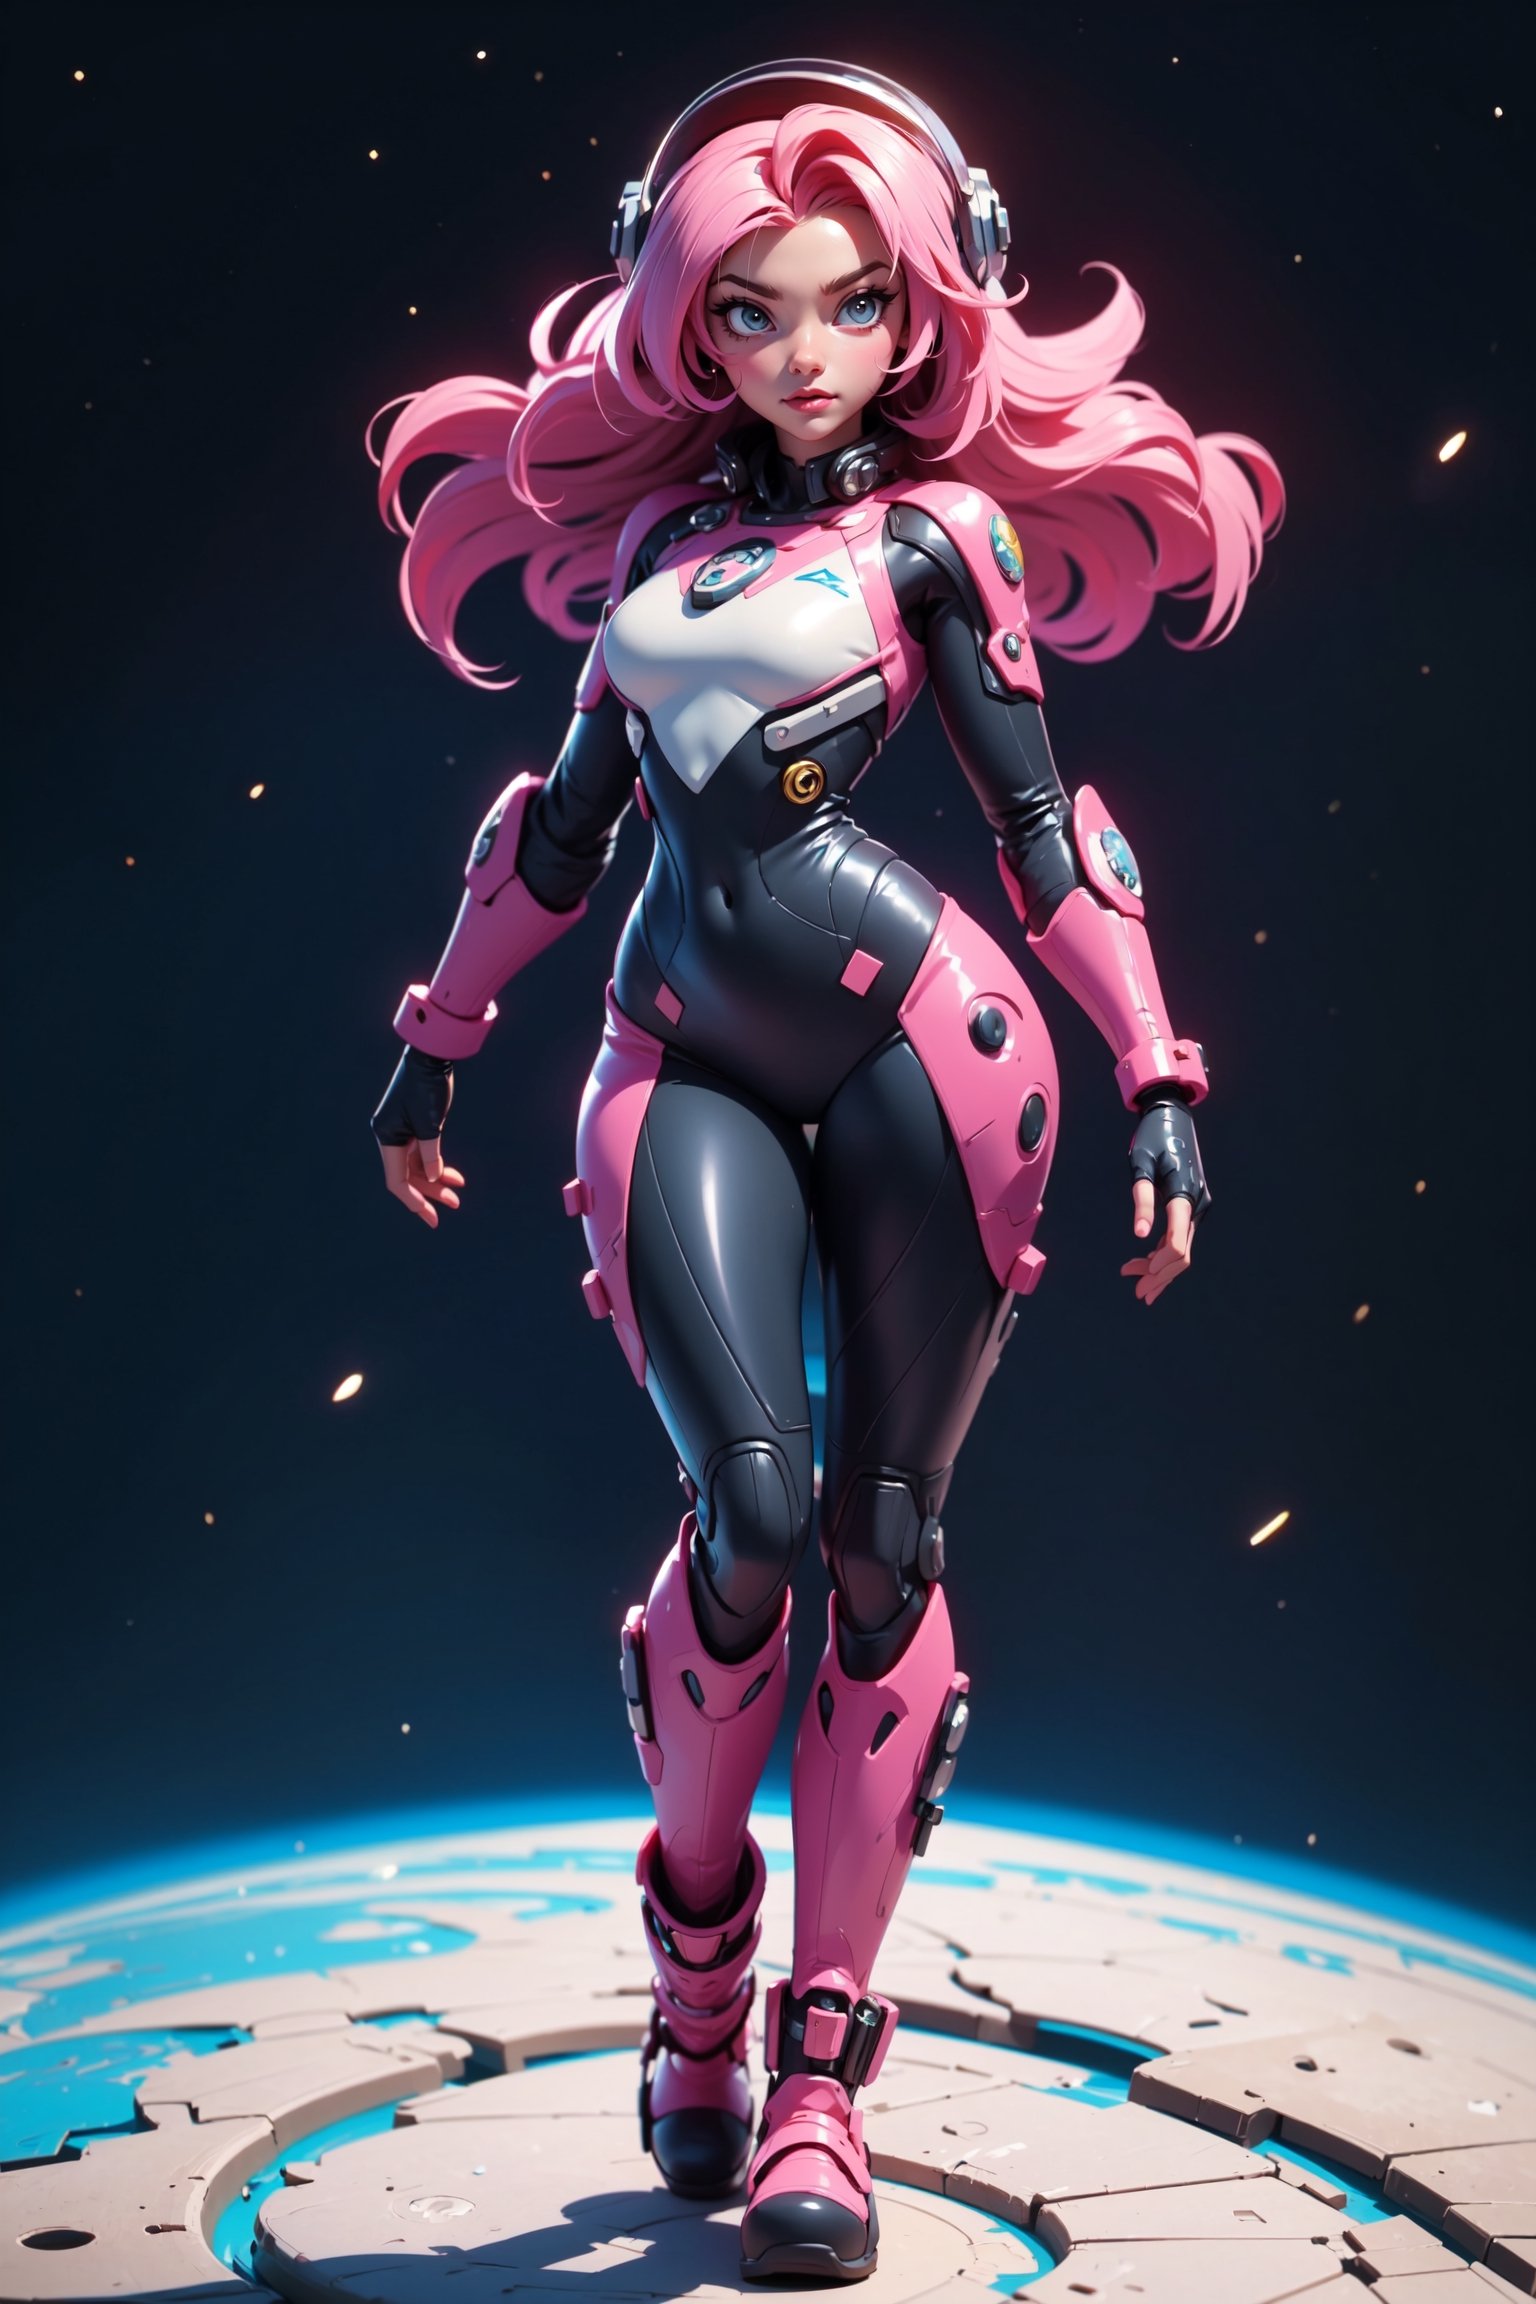 masterpiece, best quality, (detailed background), (beautiful detailed face, beautiful detailed eyes), highres, ultra detailed, masterpiece, best quality, detailed eyes, full body, 1_girl, cyberpunk scene, standing dynamic pose, long pink hair, slender figure, slender legs, slender hips. cybertronic metal arm, Her tight space suit shows off her figure, while her small breasts and large moon boots give her a unique and diverse look. With her big space helmet and jet pack, she is the epitome of a fearless space explorer.